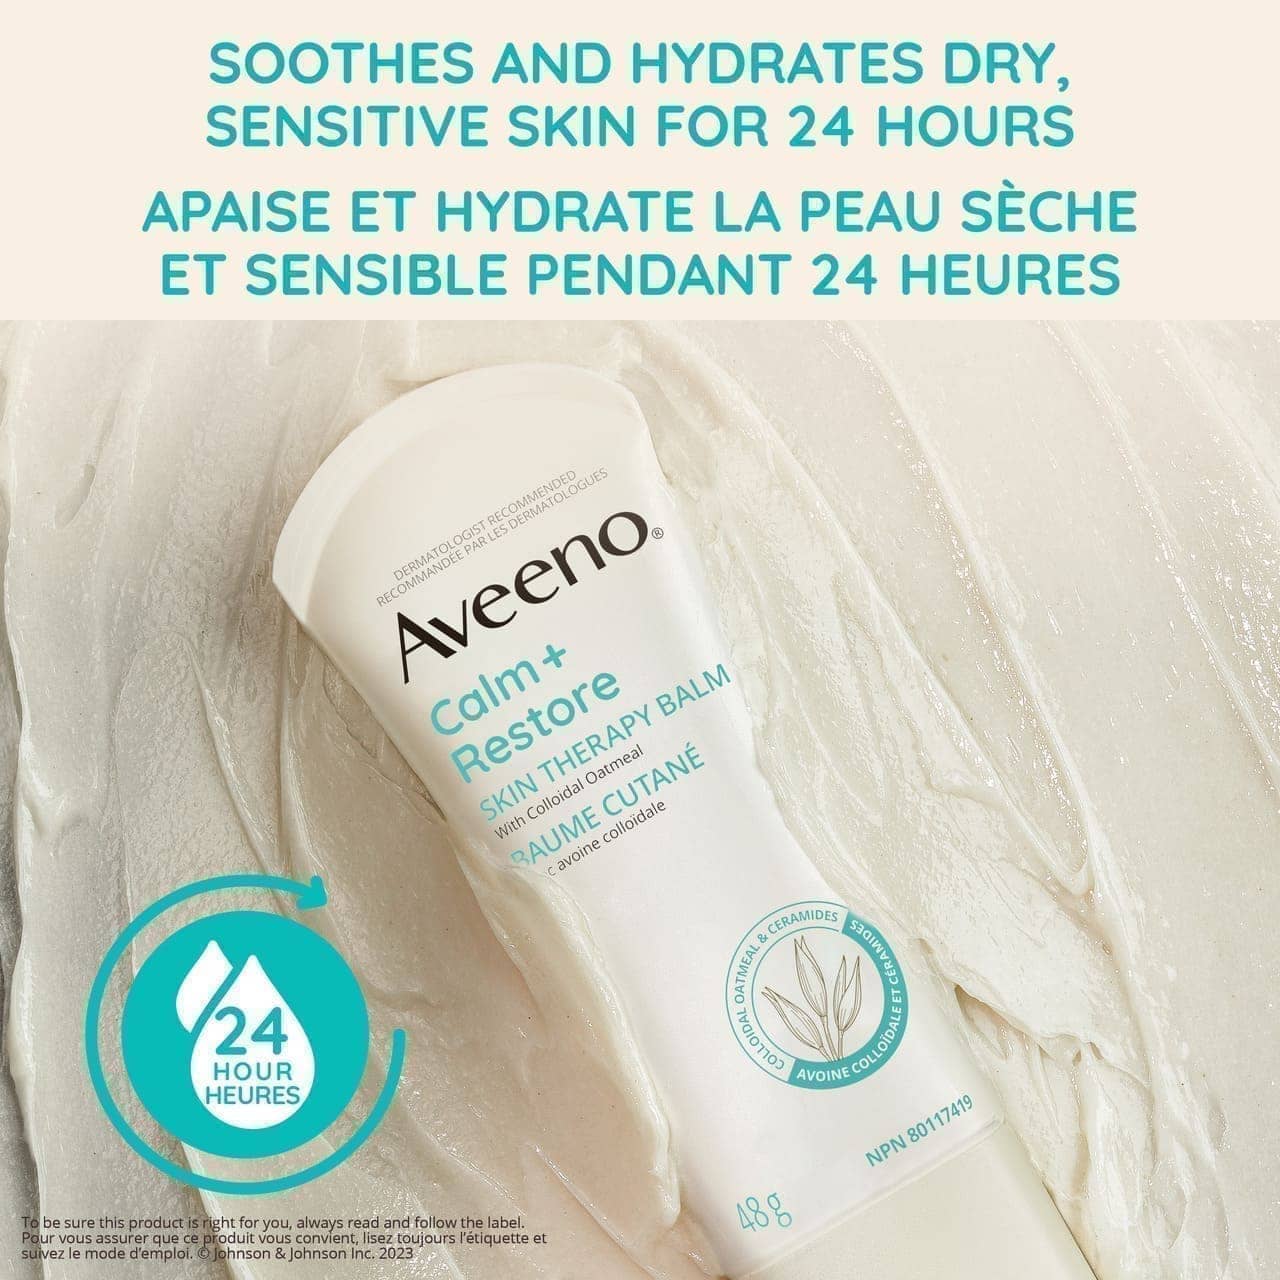 AVEENO® Calm + Restore Skin Therapy Balm, squeeze tube, 48 g with a claim stating ' Soothes and Hydrates Dry, Sensitive Skin for 24 hours'